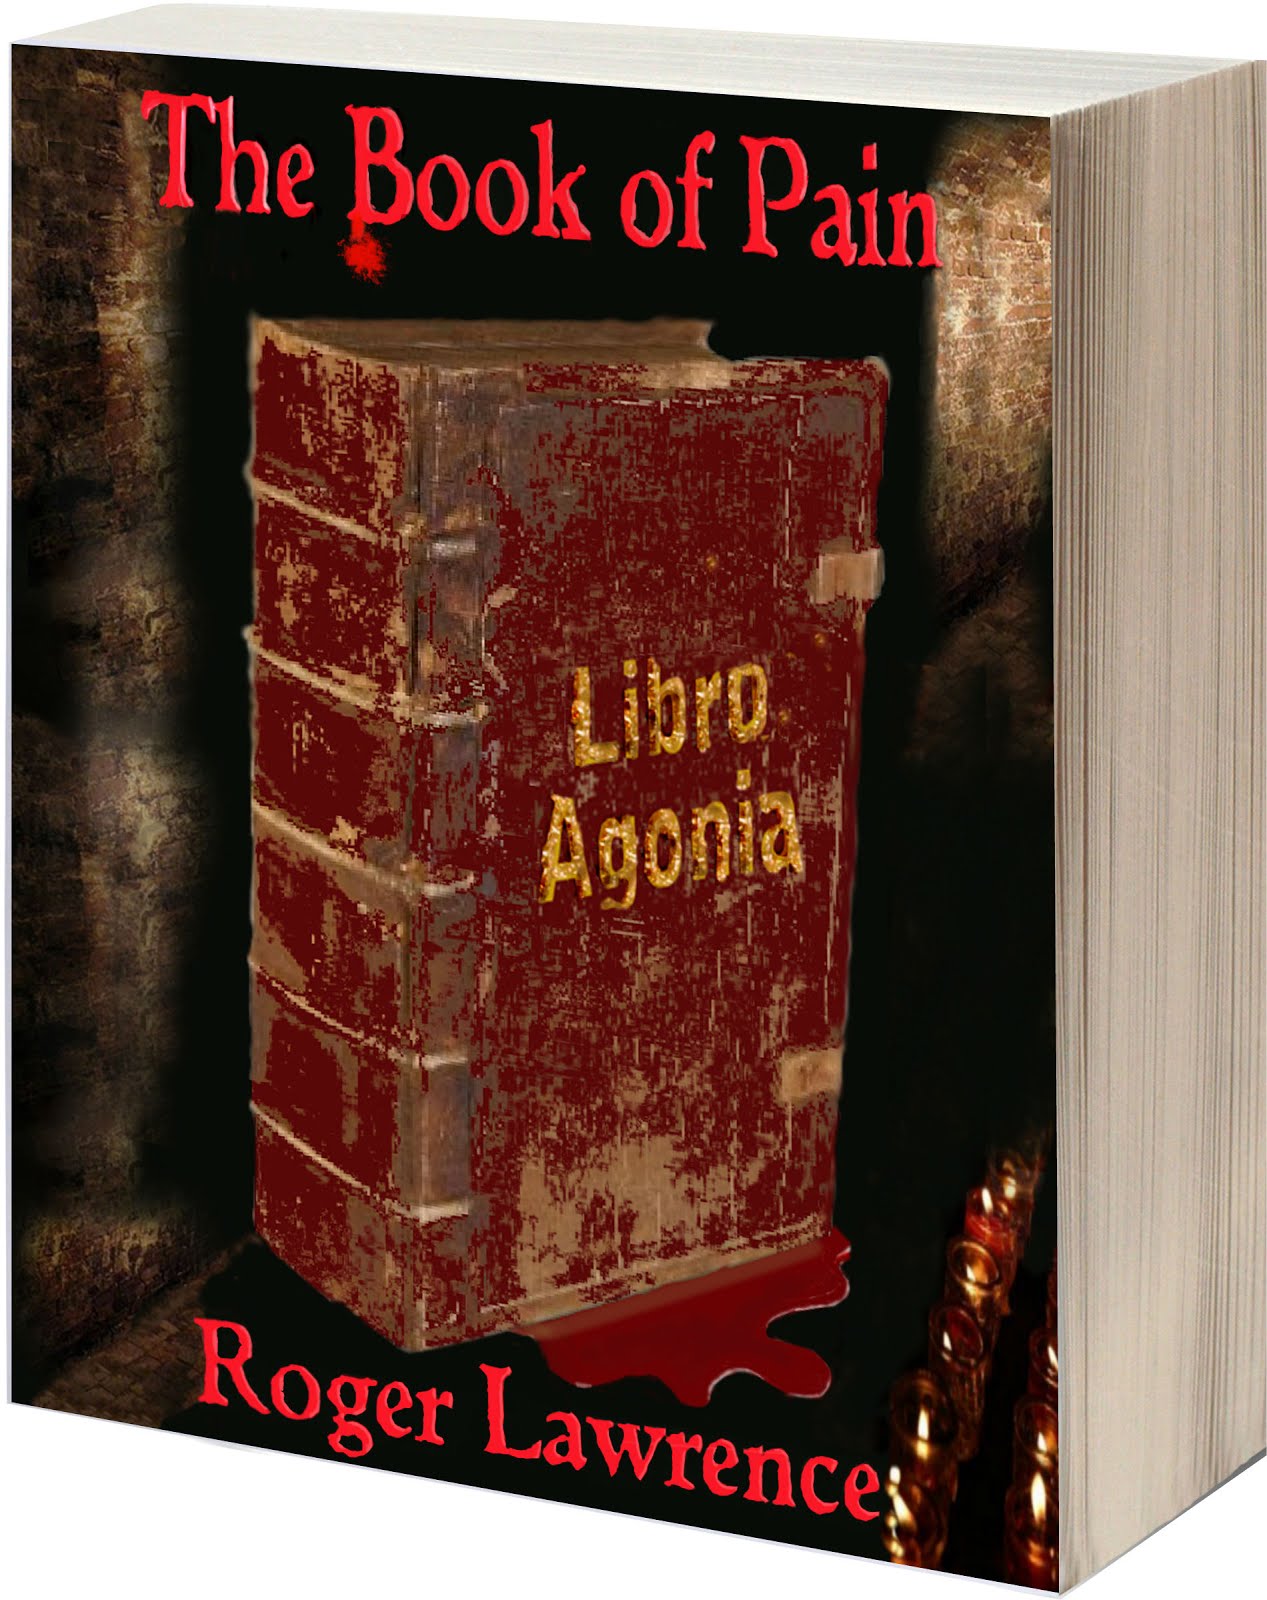 The Book of Pain